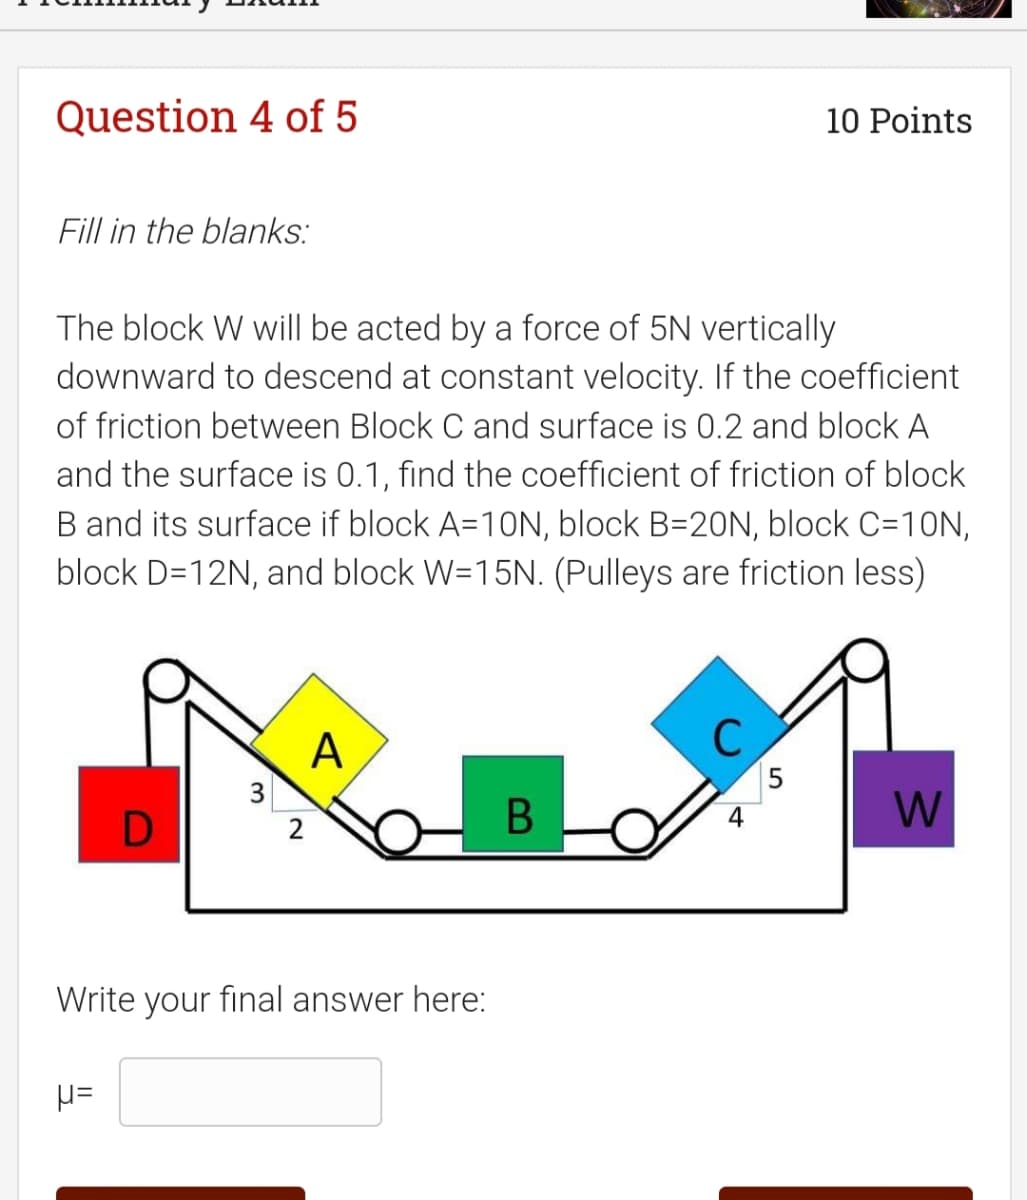 Question 4 of 5
10 Points
Fill in the blanks:
The block W will be acted by a force of 5N vertically
downward to descend at constant velocity. If the coefficient
of friction between Block C and surface is 0.2 and block A
and the surface is 0.1, find the coefficient of friction of block
B and its surface if block A=10N, block B=20N, block C=10N,
block D=12N, and block W=15N. (Pulleys are friction less)
A
15
3
4
W
2
Write your final answer here:
